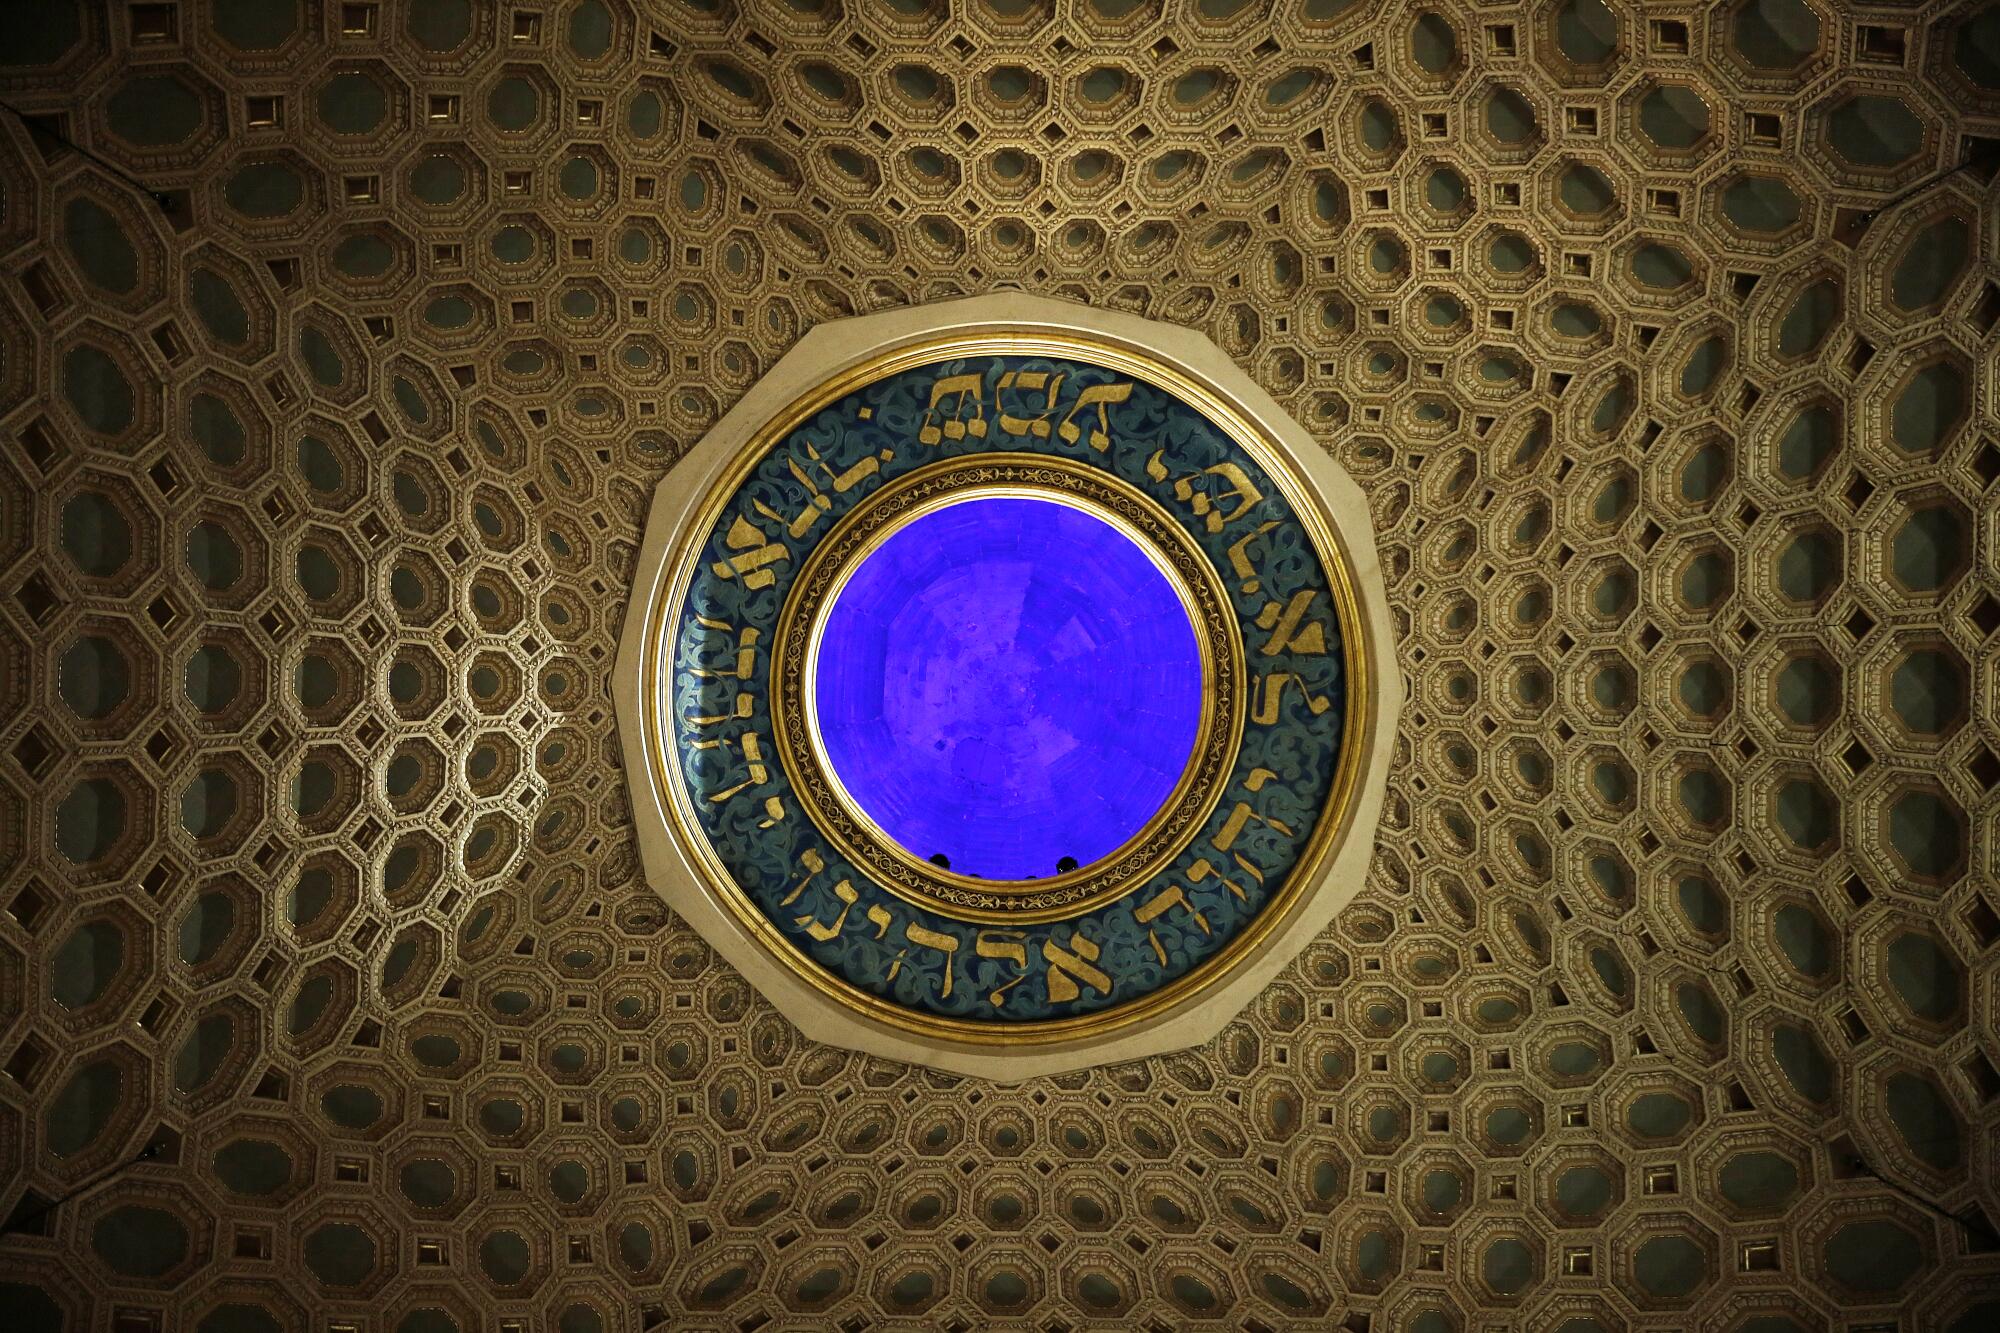 A view of the honeycomb pattern in the ceiling of the Wilshire Boulevard Temple's dome. A blue oculus is at center.